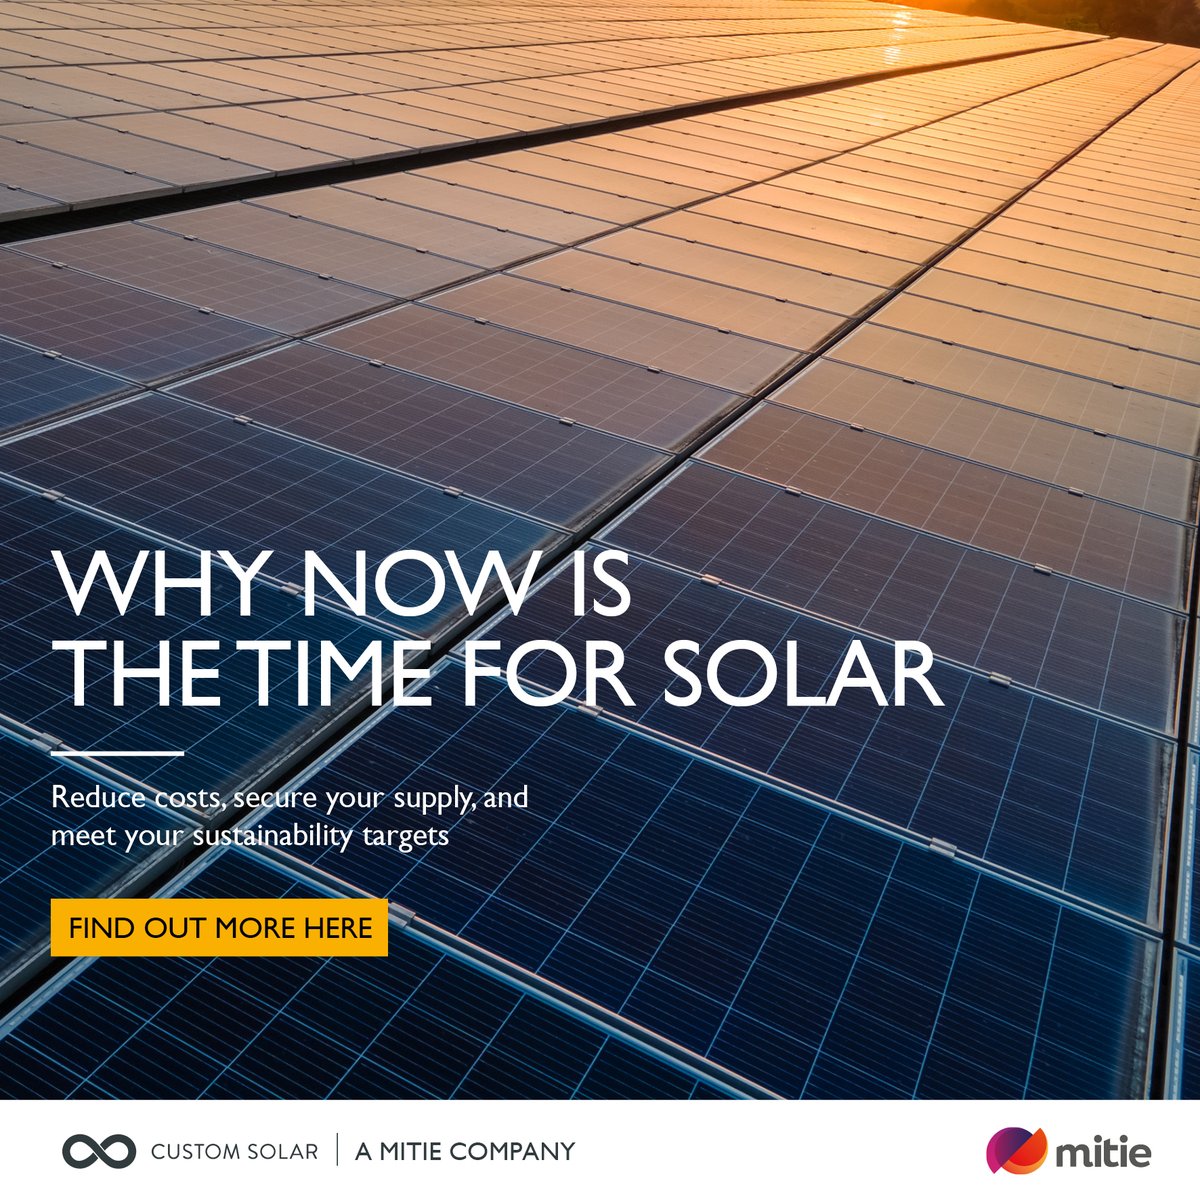 If the #EnergyCrisis has taught us anything, it’s that something needs to change. Let’s reinvent the way we think about power. Our latest eBook explores how #SolarPV helps to ensure supply, reduce costs by up to 30%, and #Decarbonise our environment > wearemit.ie/fWnU50LhHCX